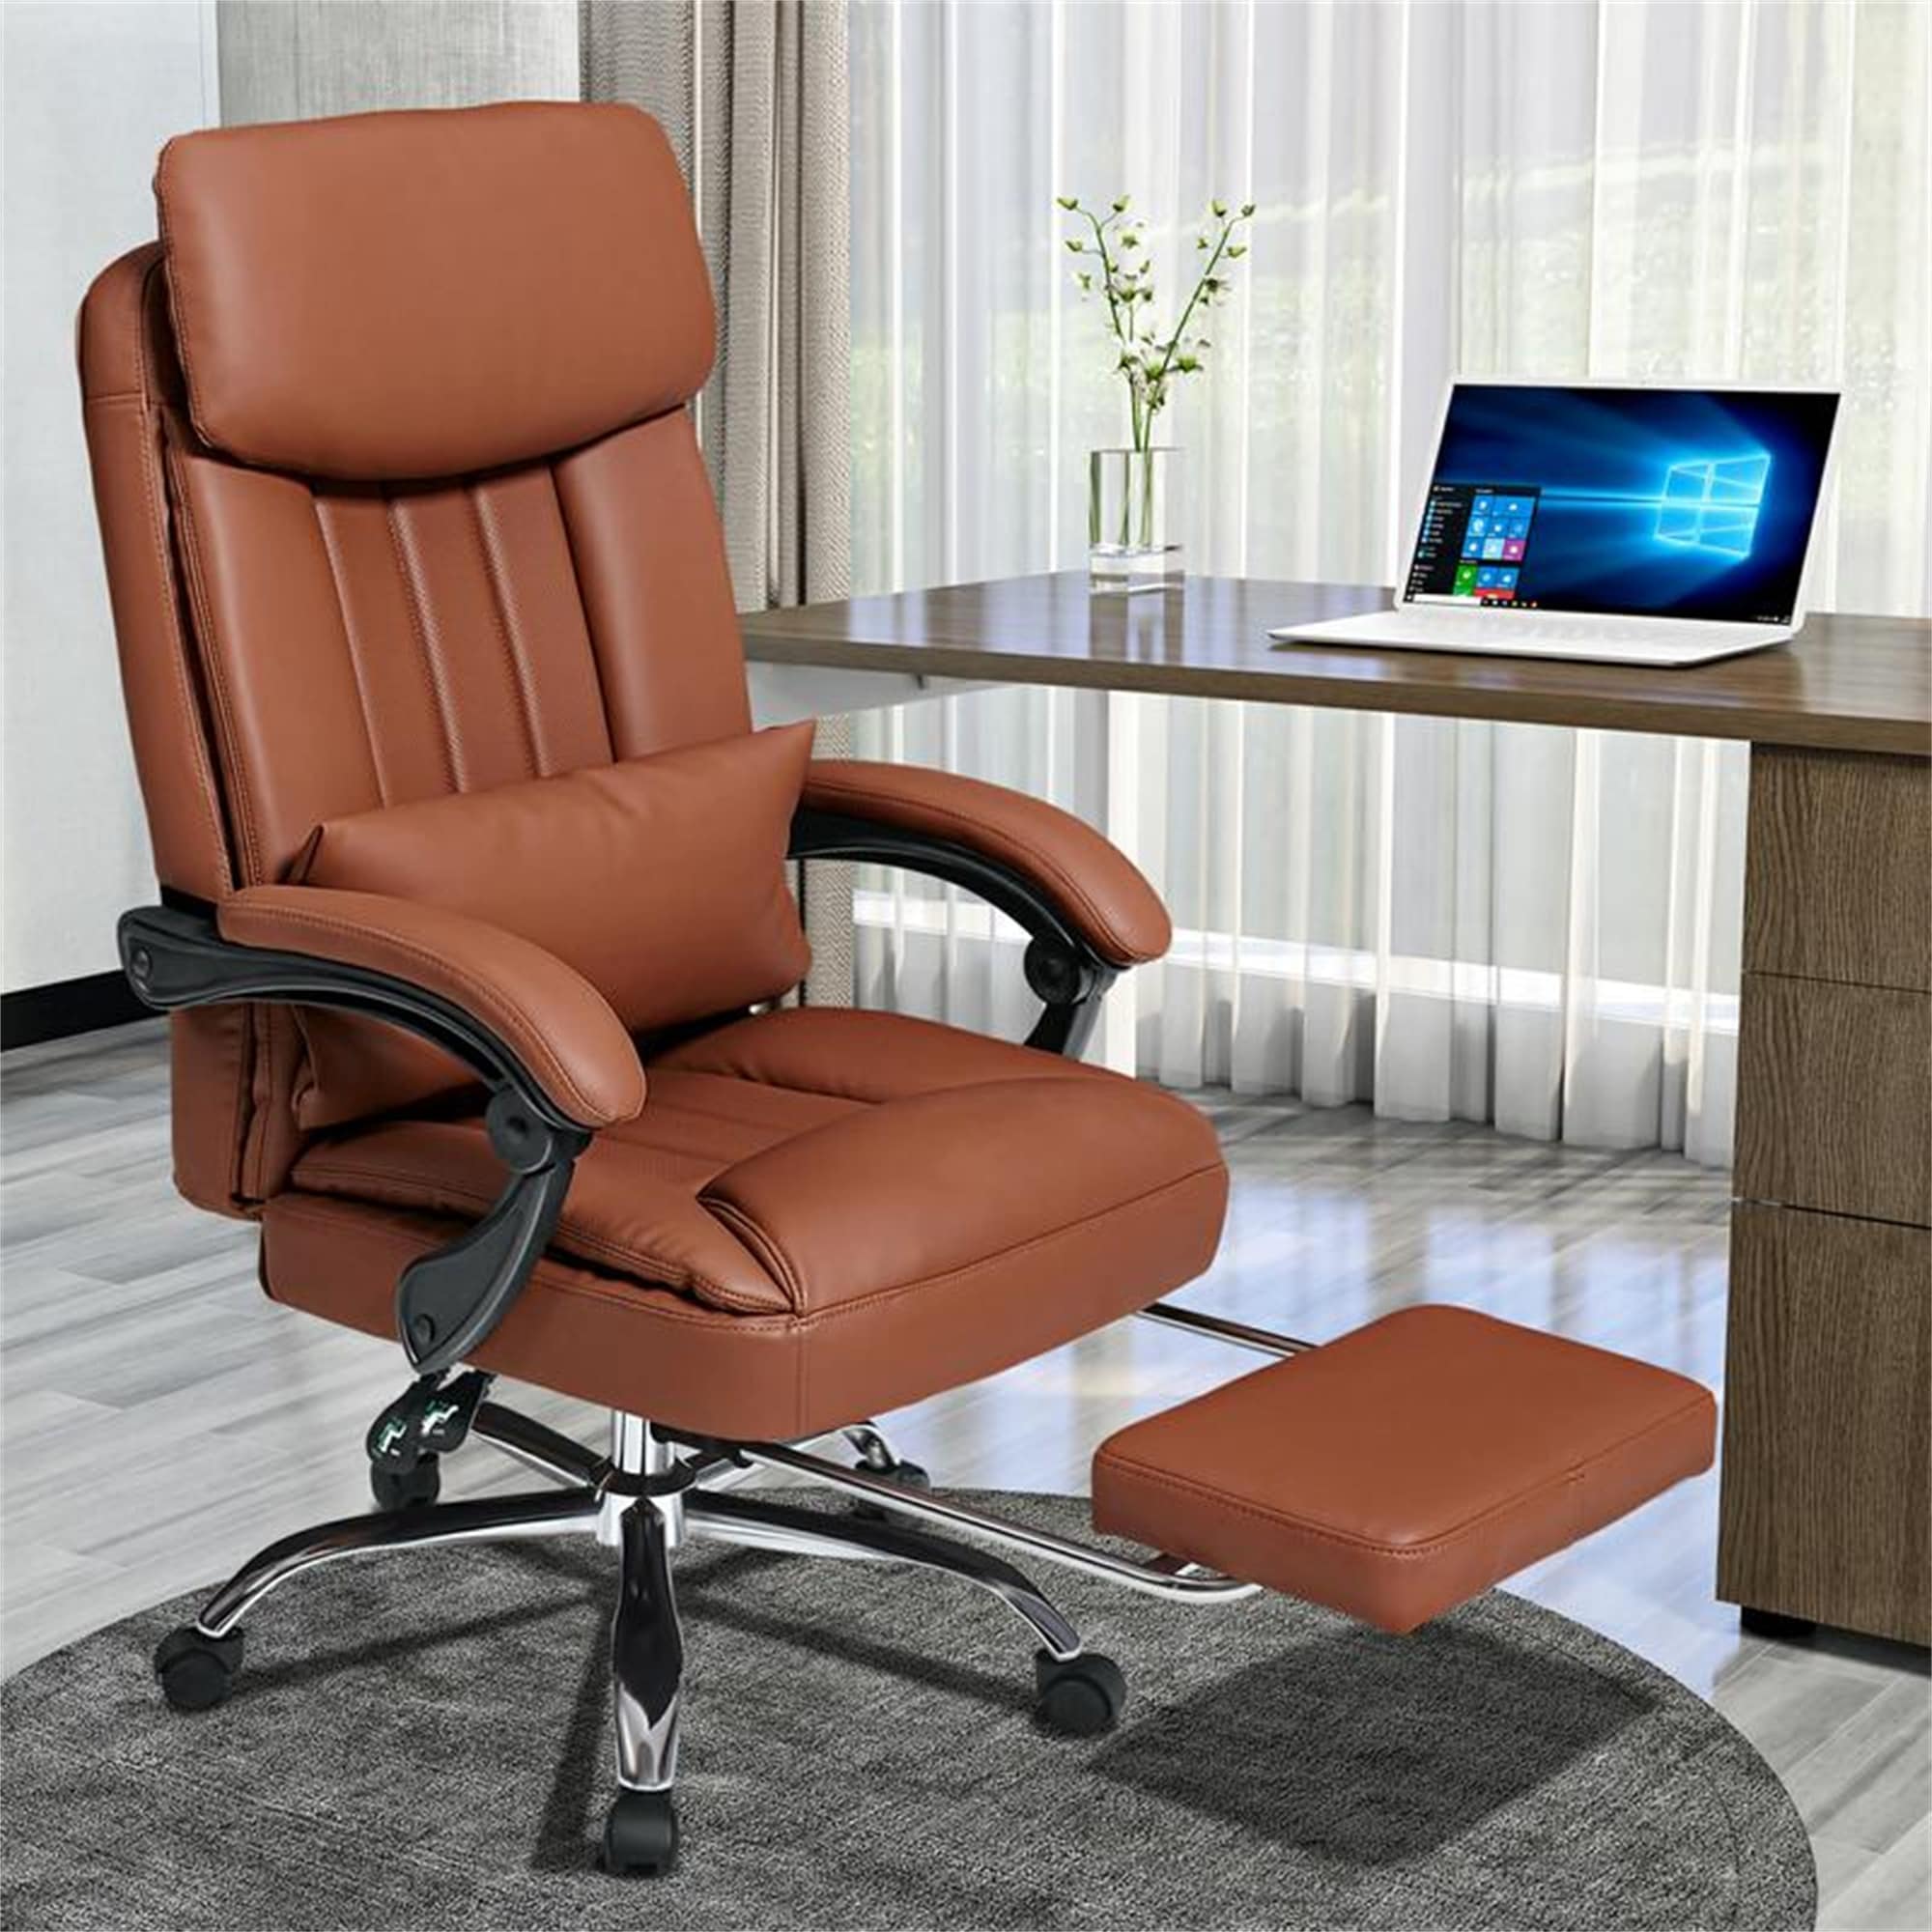 https://ak1.ostkcdn.com/images/products/is/images/direct/4fcf0f45384d6fce19f0c8c2568022ae61b60b66/Executive-Chair%2C-High-Back-Leather-Desk-Chair-W--Retractable-Footrest.jpg